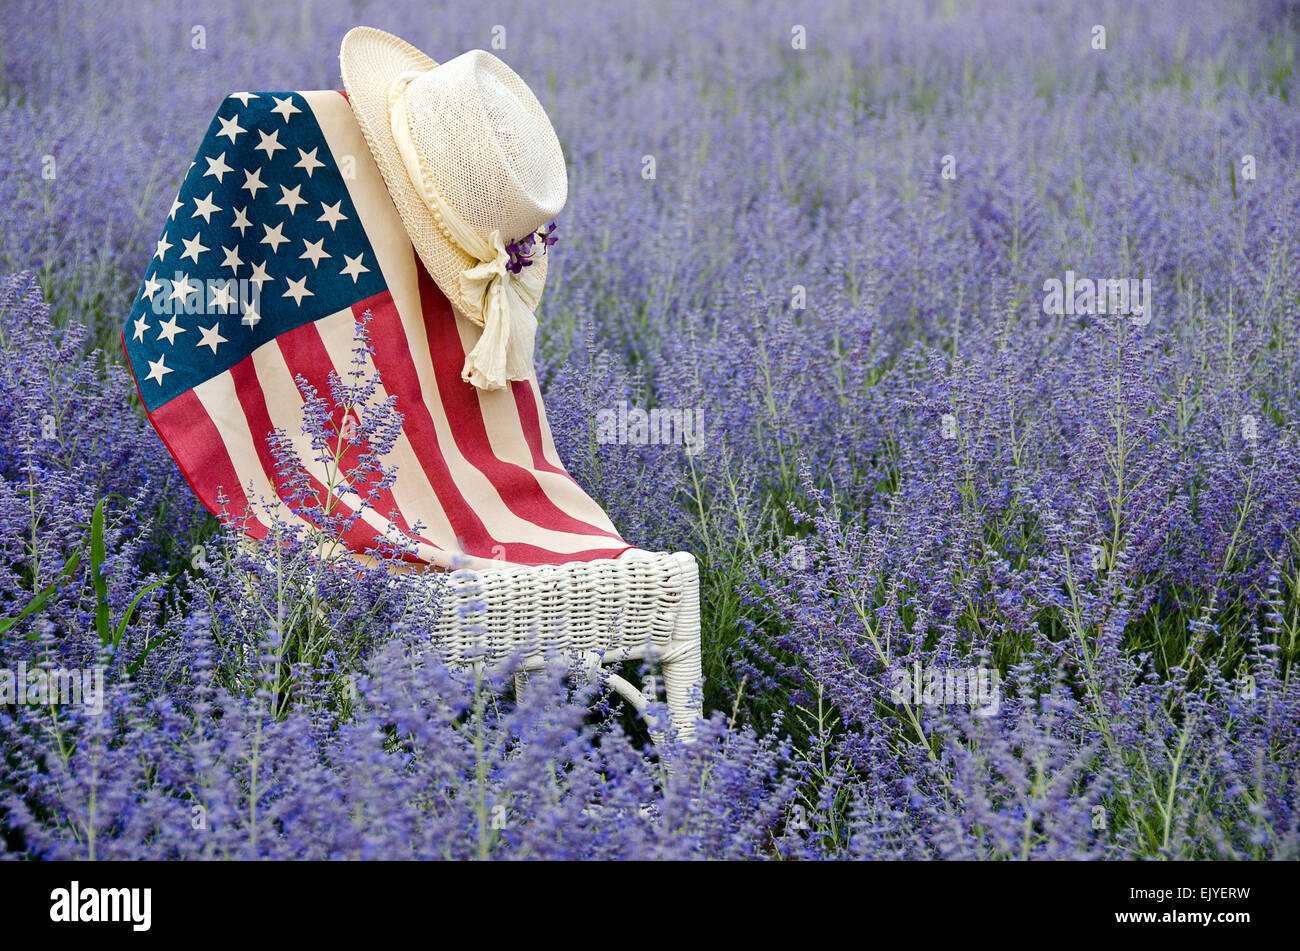 Hat and American flag on a white wicker chair in a field of purple Russian Sage. Stock Photo